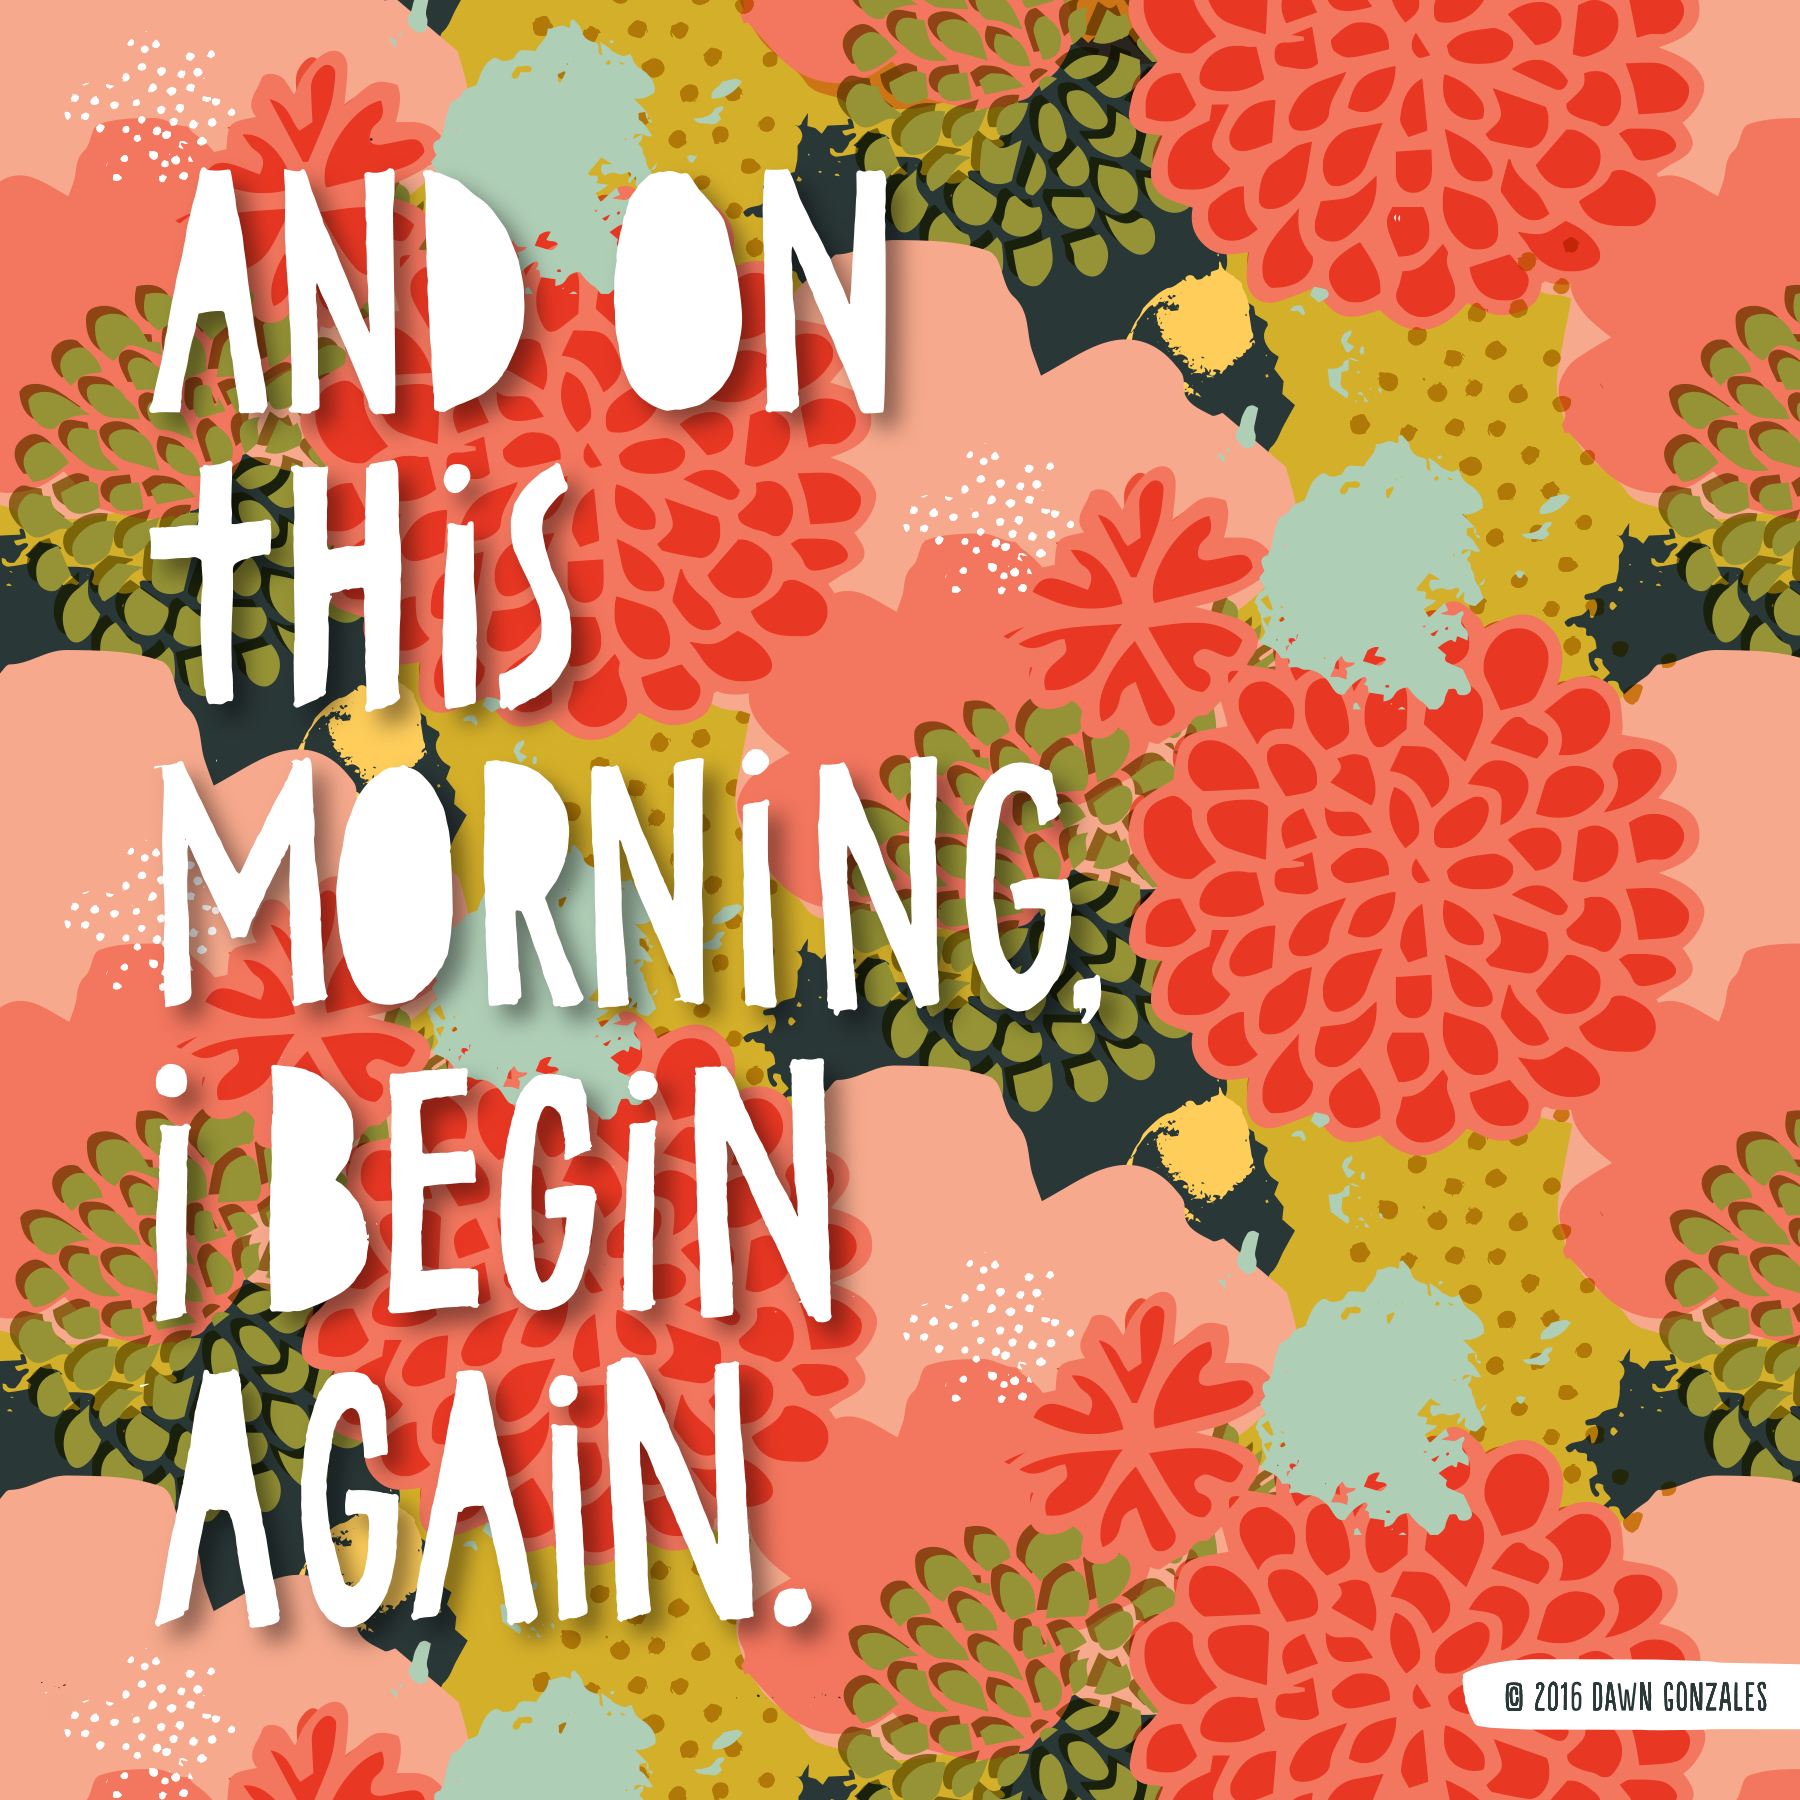 On This Morning I Begin Again, 2016